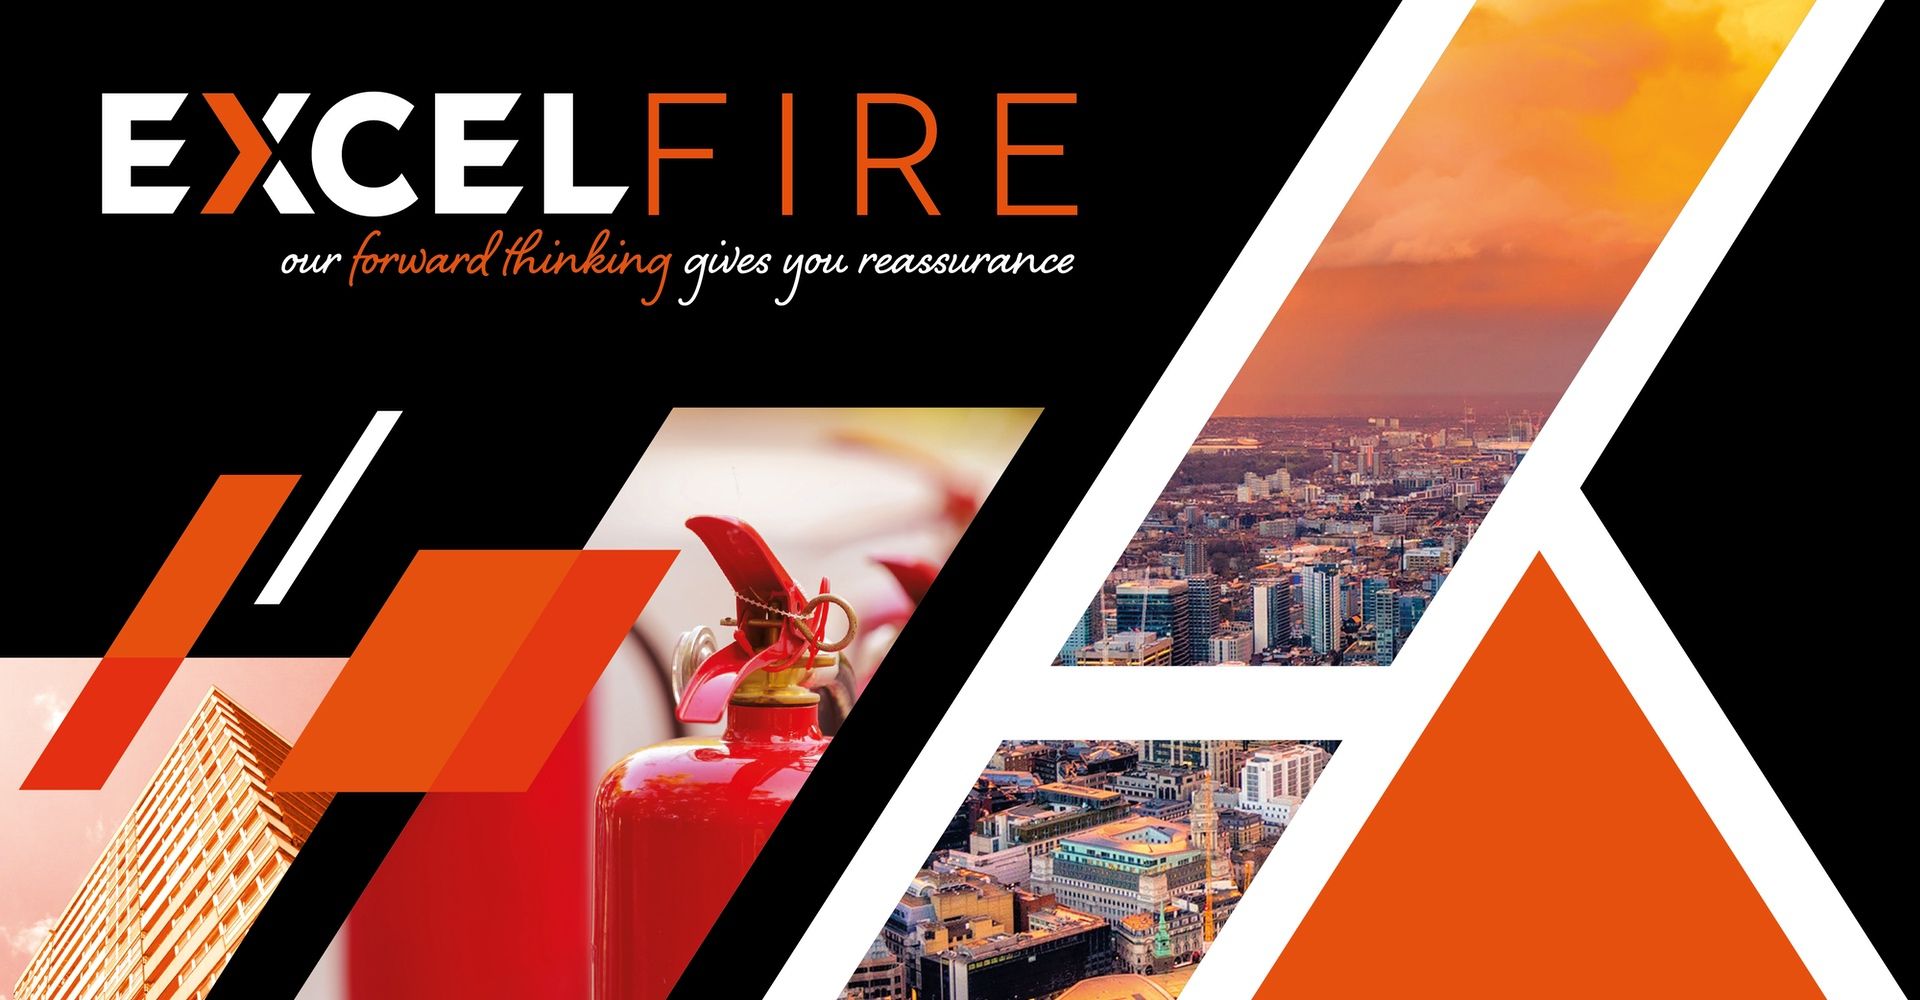 Excel Fire Limited branded images of fire extinguisher and view of city with orange tints.